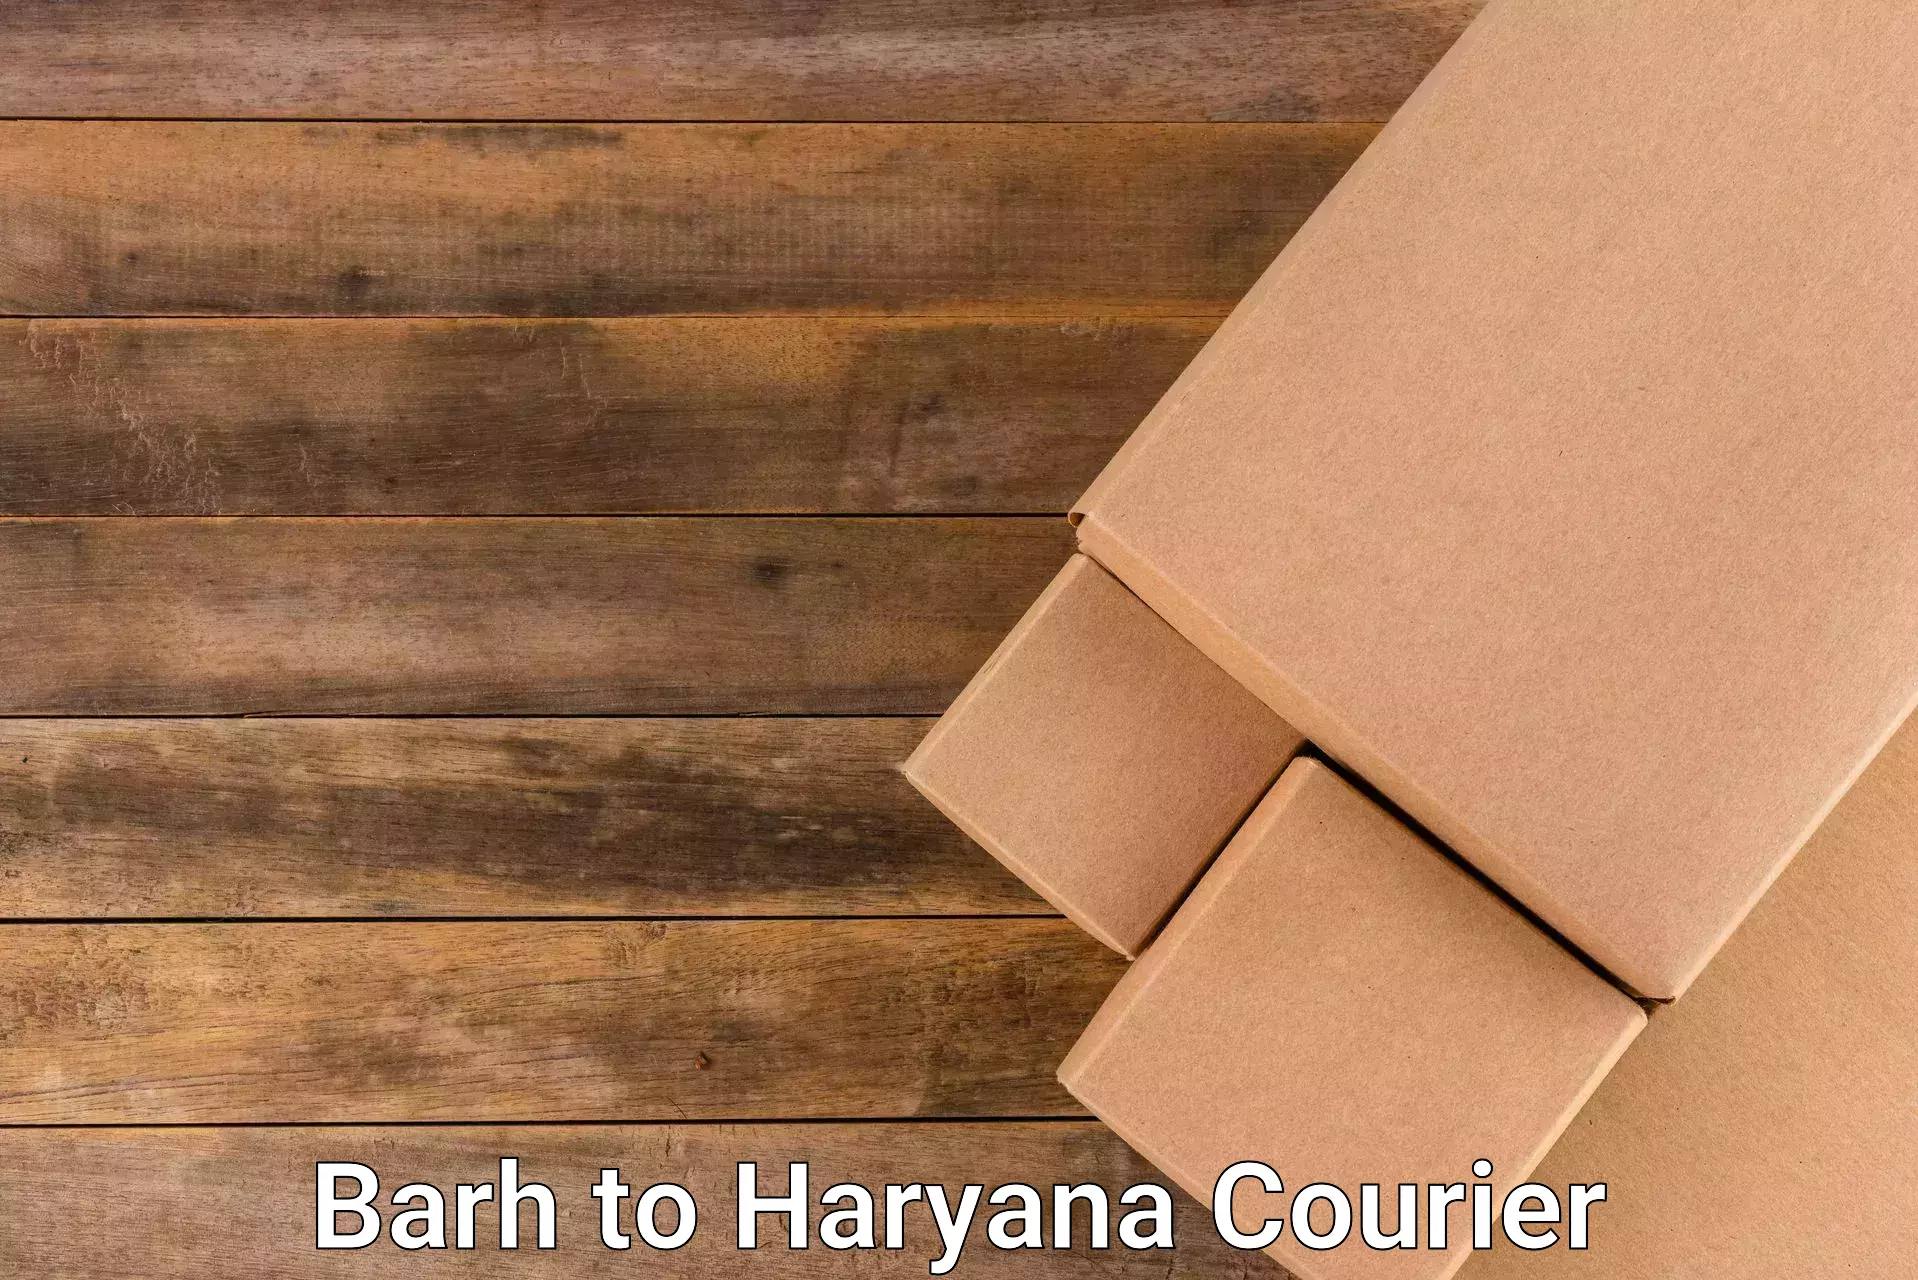 Nationwide delivery network Barh to Haryana